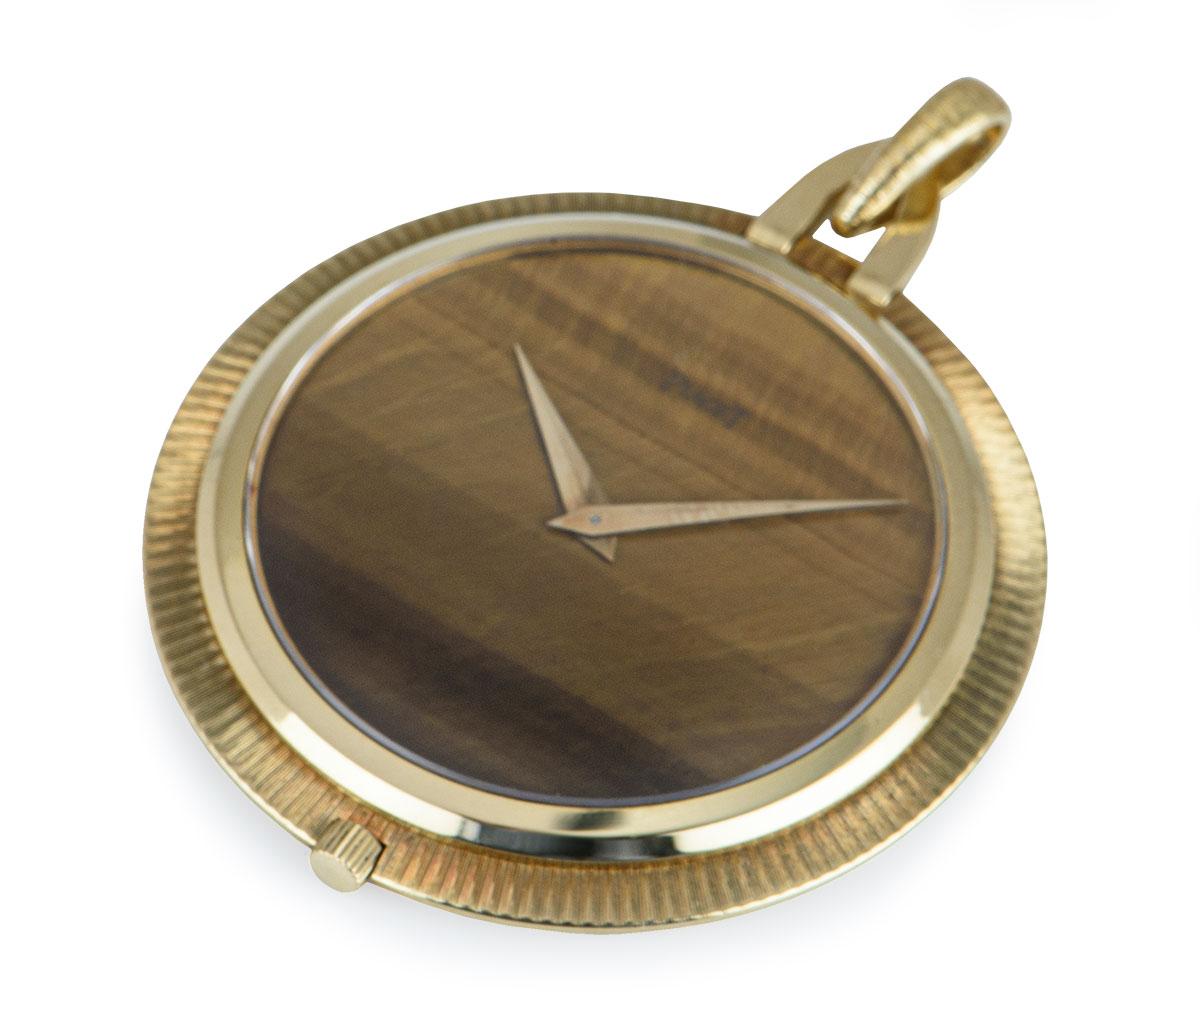 A vintage 43 mm open face pocket watch in yellow gold by Piaget. Features a tigers eye dial with gilt lance hands. Fitted with mineral glass and a manual wind movement beneath the snap-on case back which can be seen in the photos.

In excellent